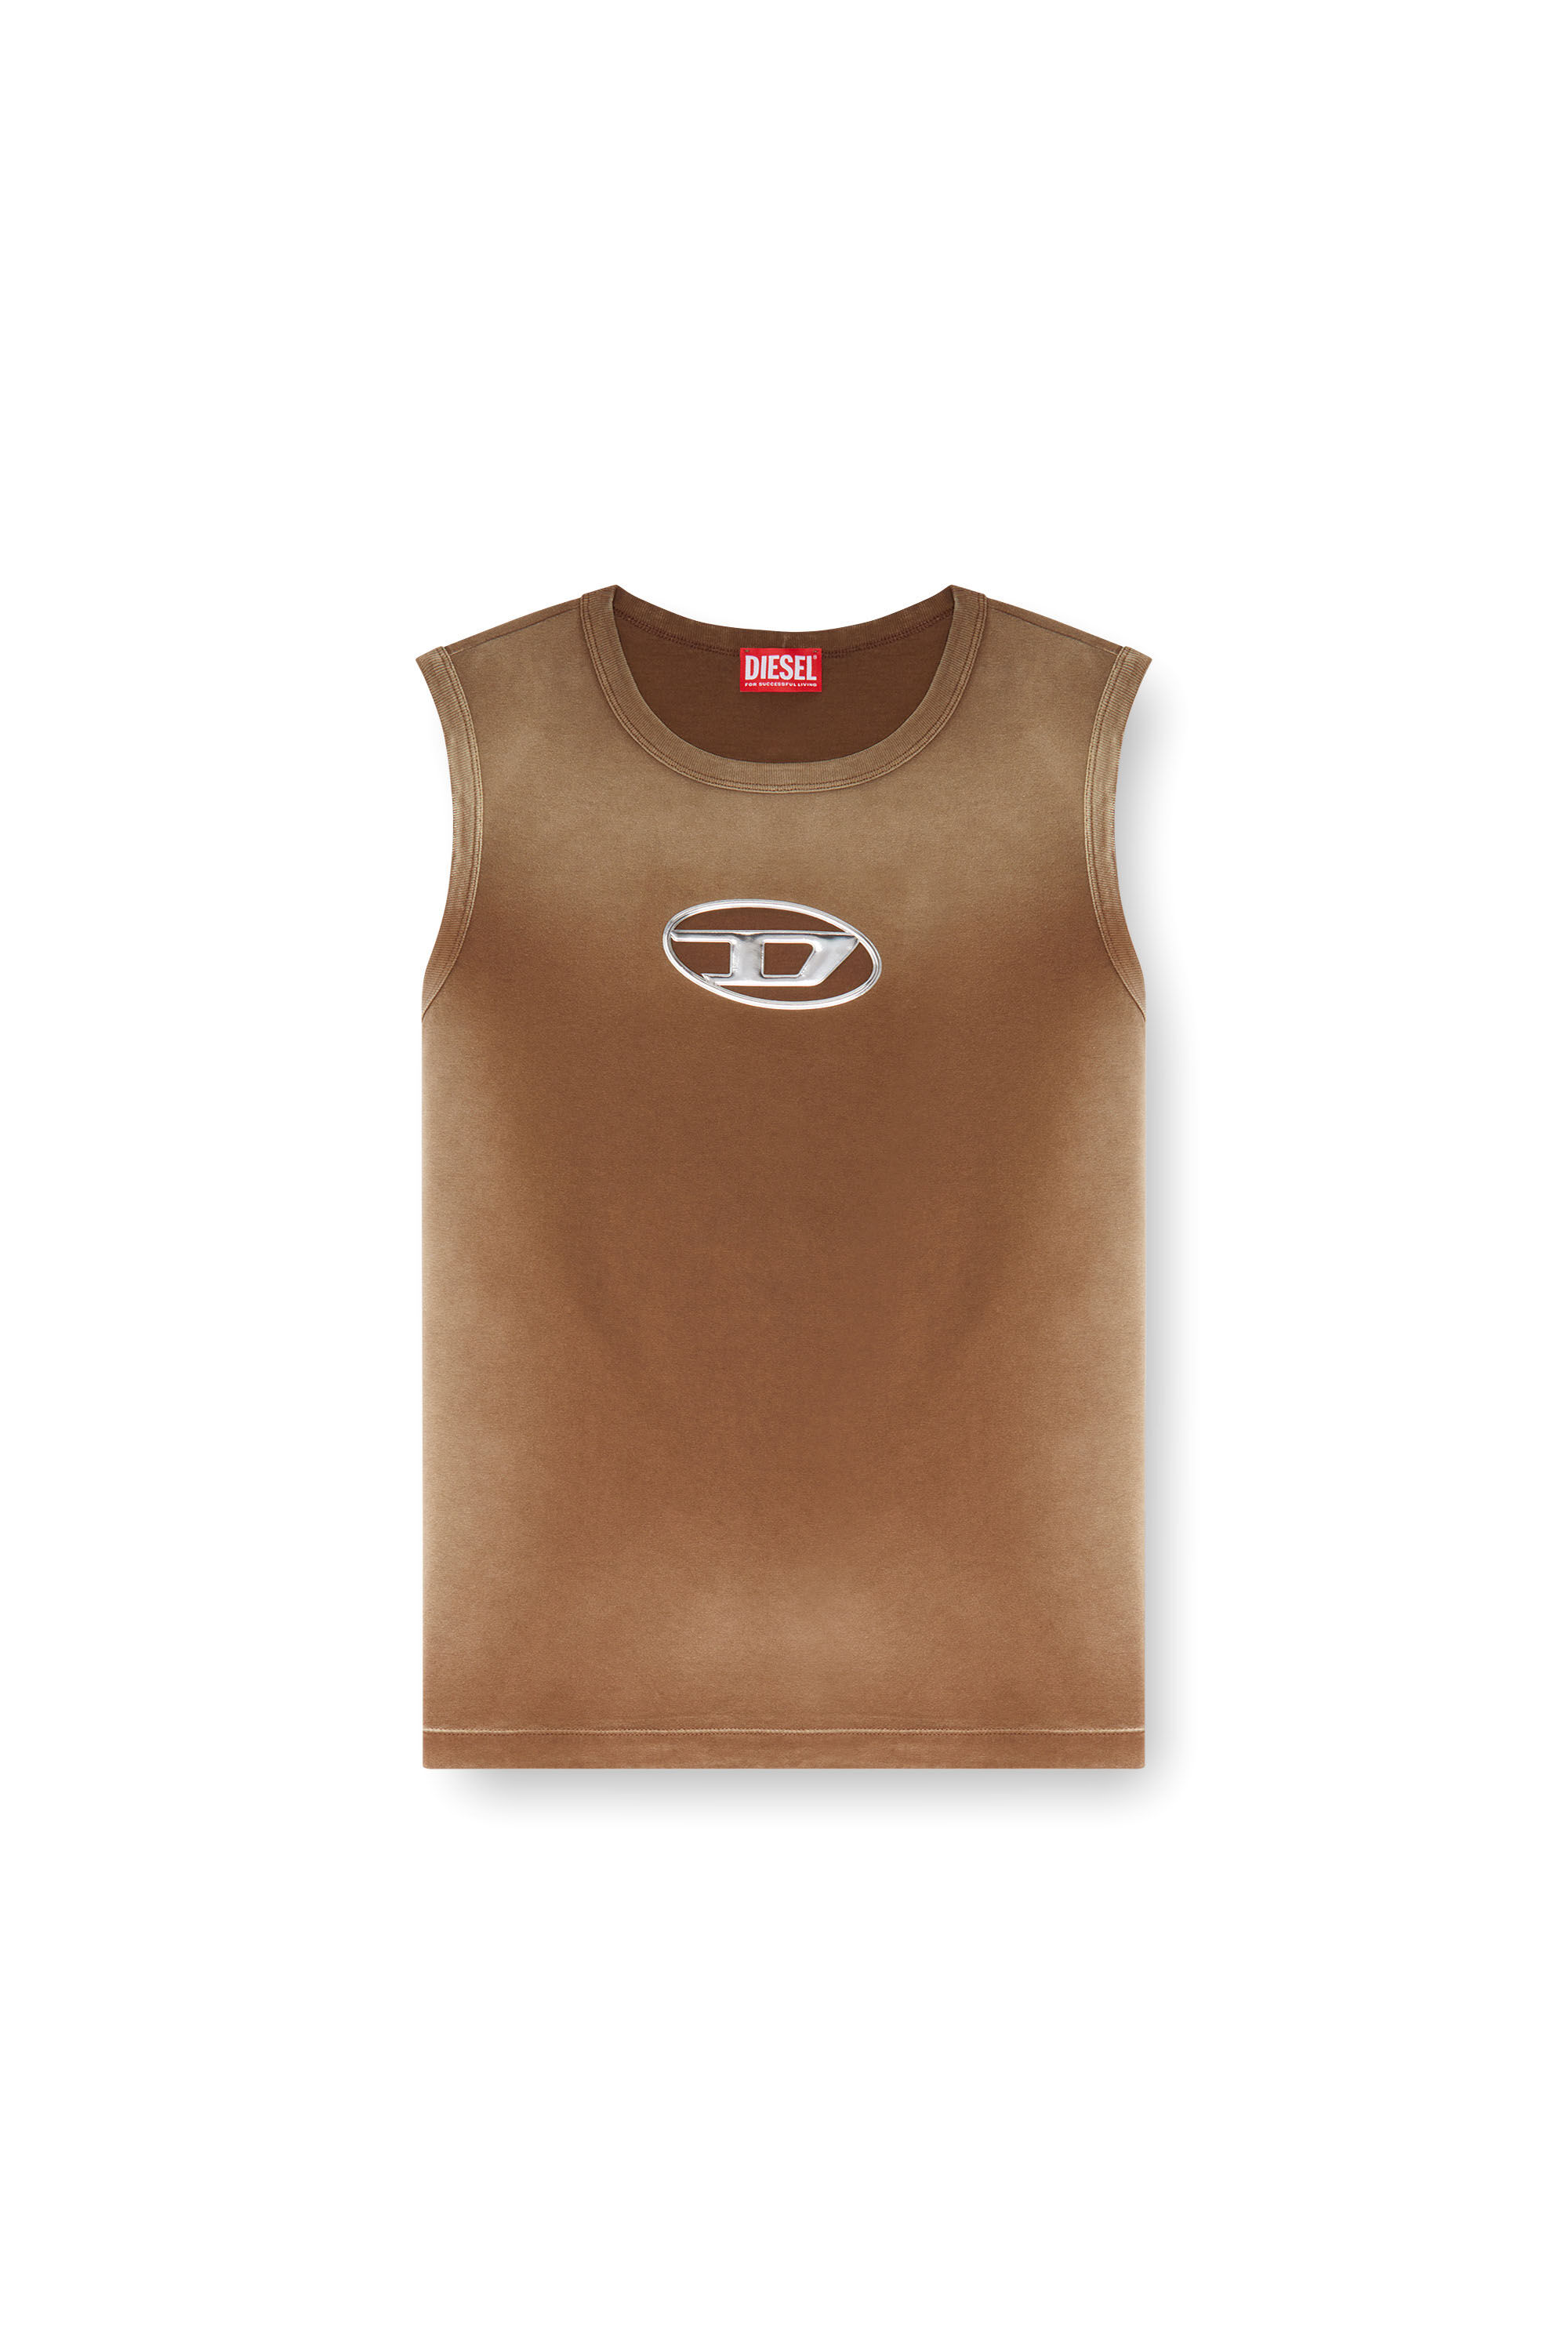 Men's Faded tank top with puffy Oval D | Brown | Diesel